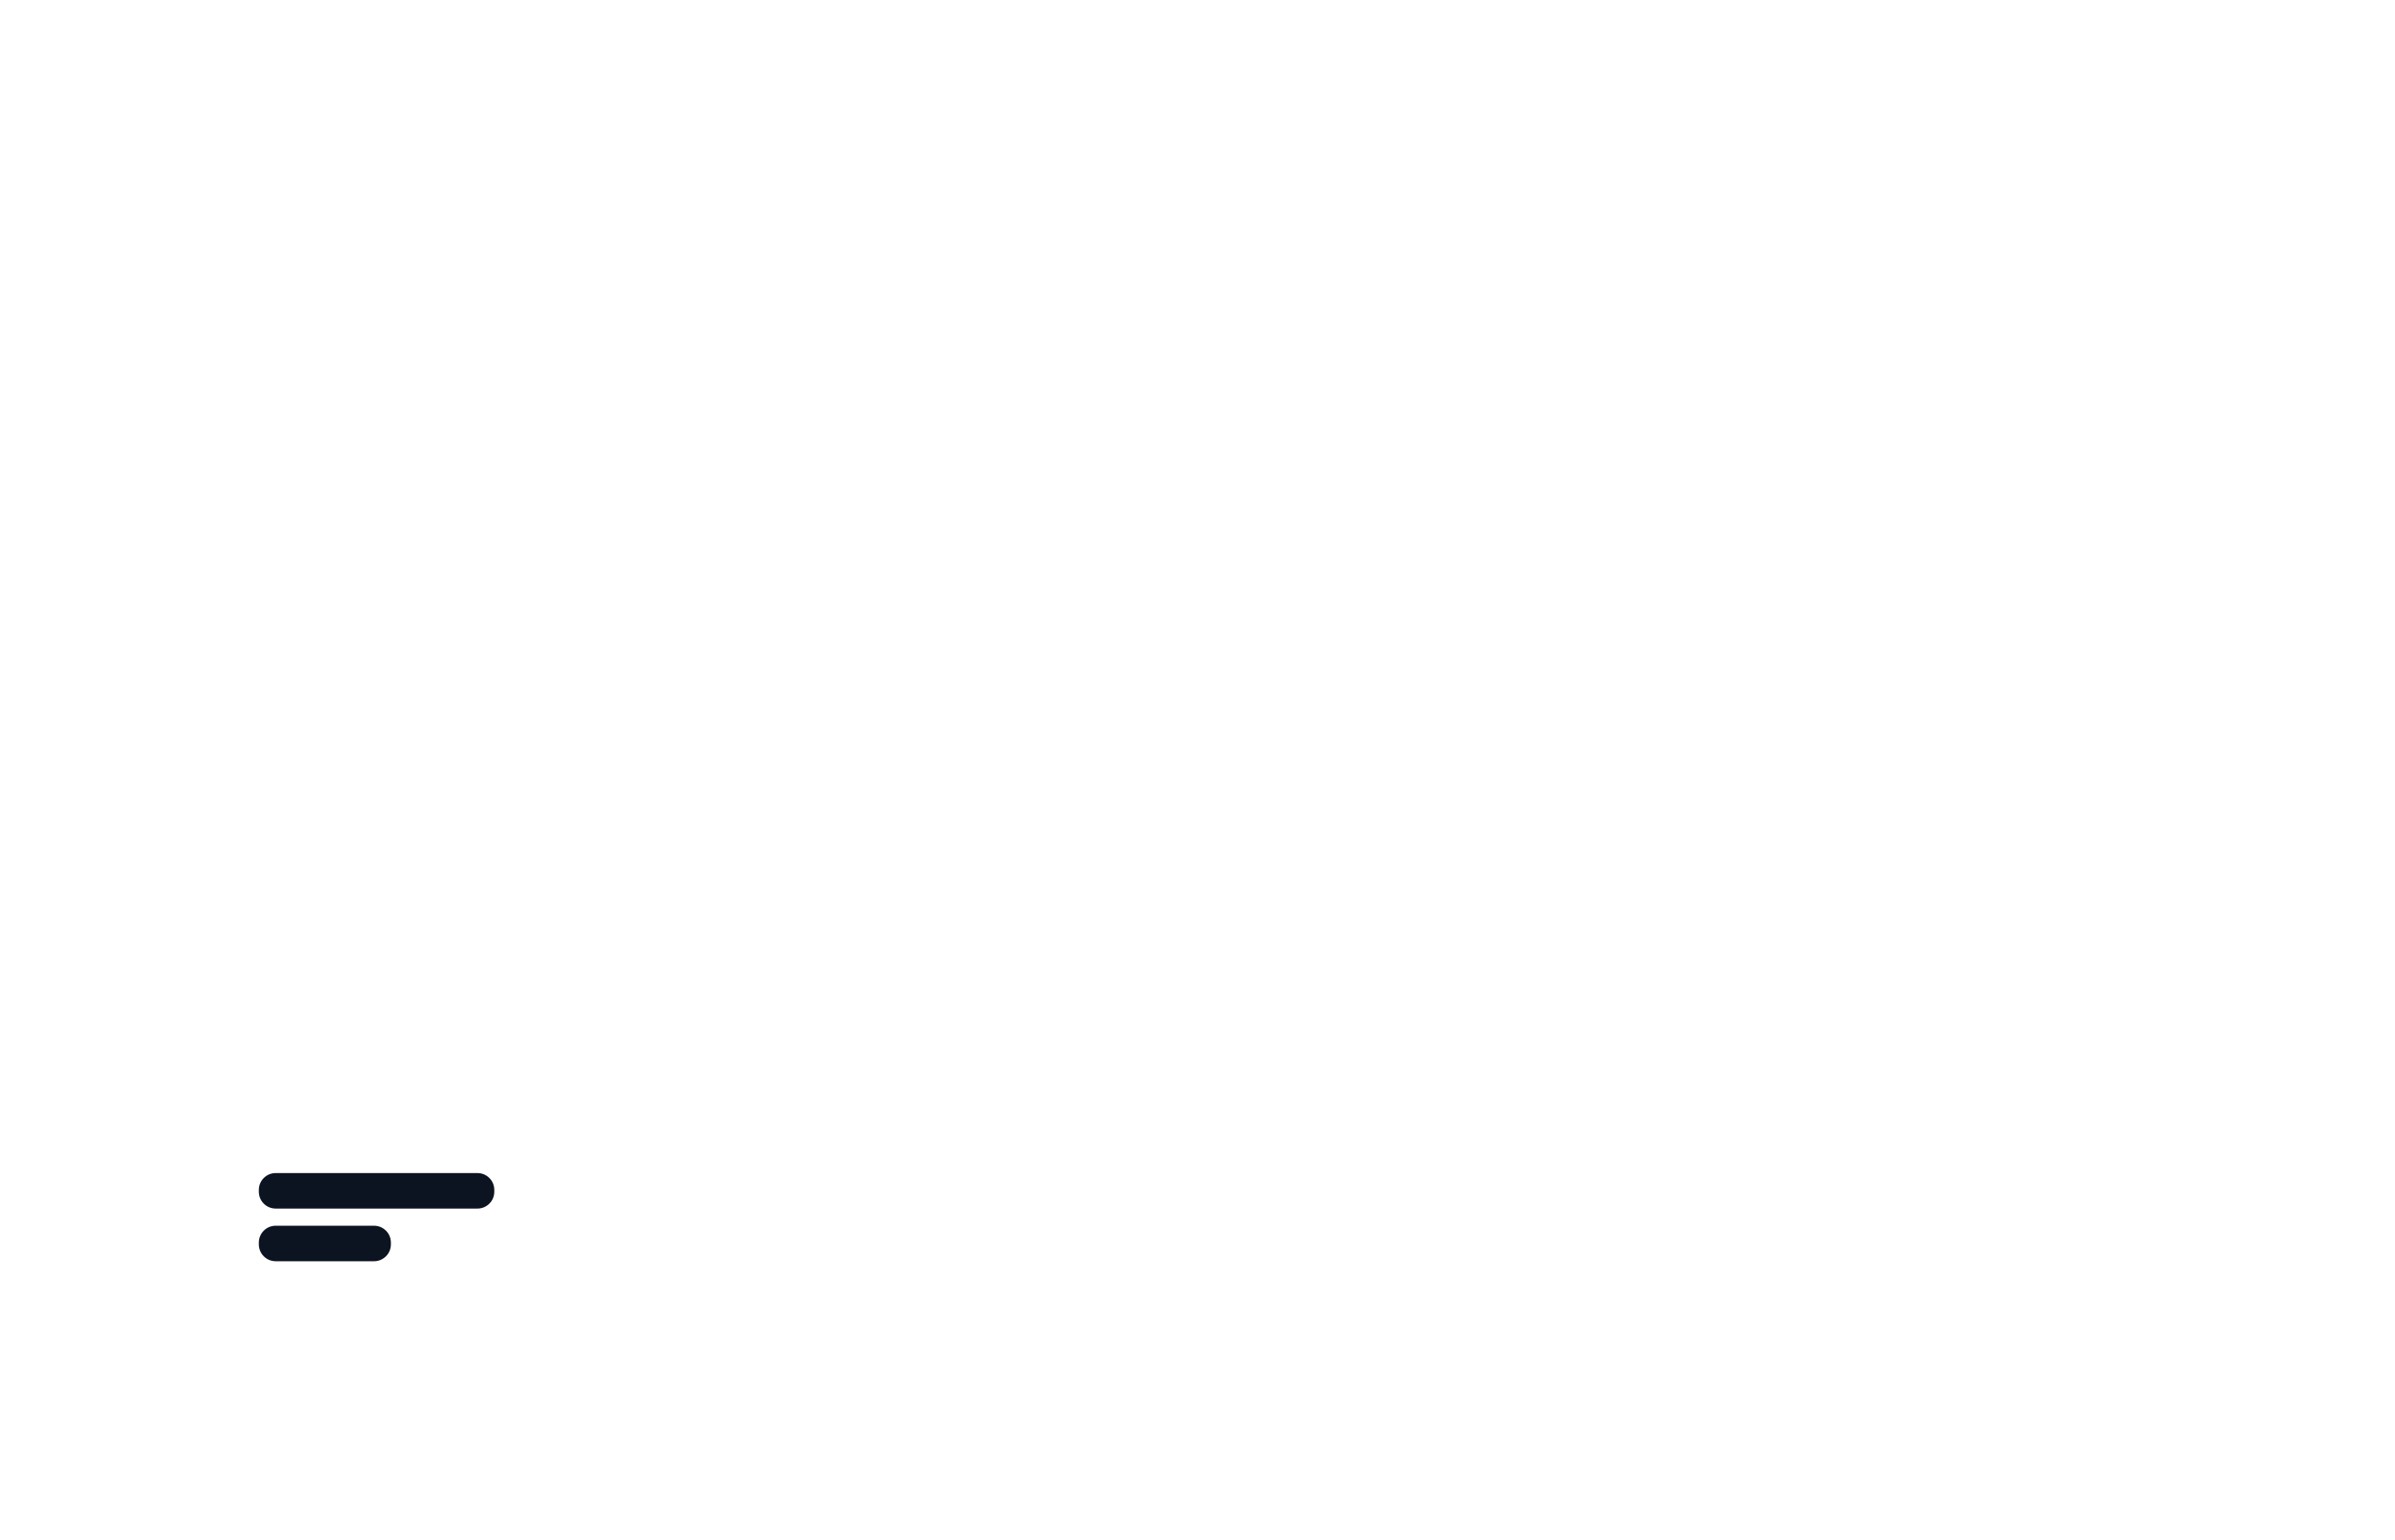 an illustration of the steps required to post a listing on CannaMLS: 1 - sign up on CannaMLS. 
                2 - fill in the listing form. 3 - wait for listing approval. 4 - your listing is live. 5 - receive inquiries from potential buyers.